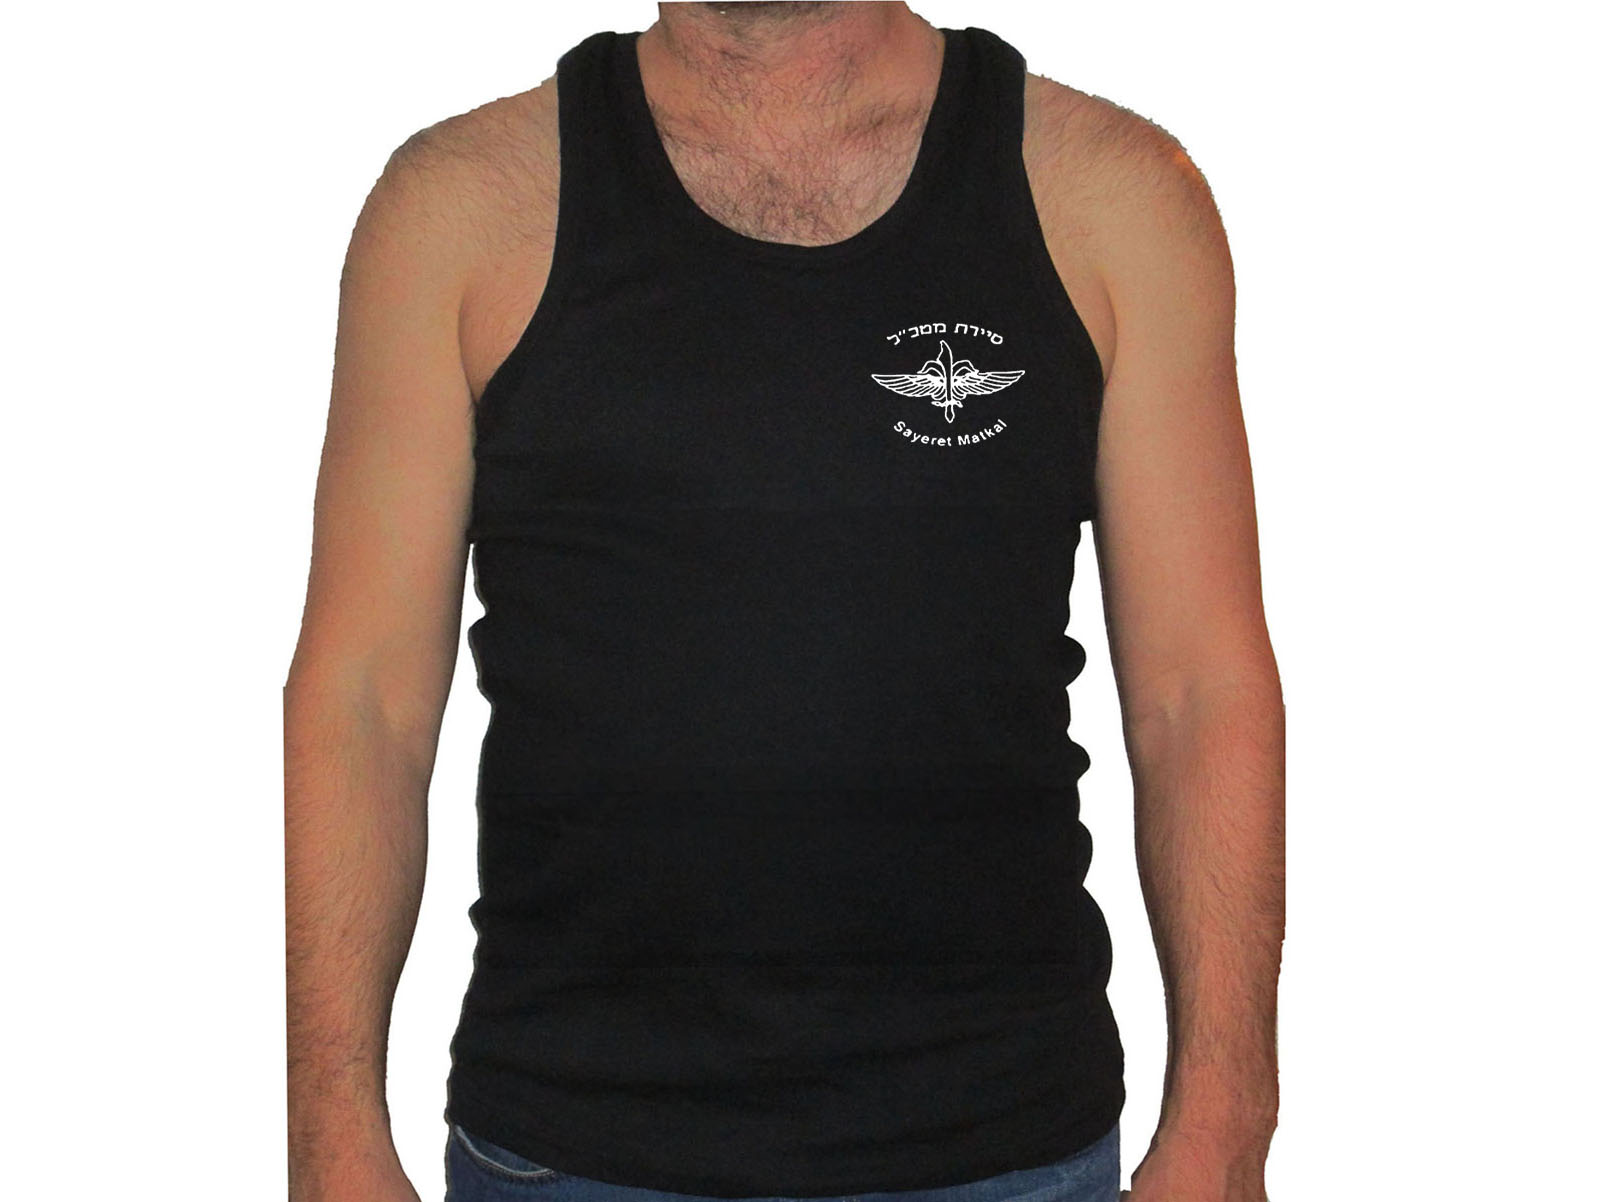 Israeli special forces Ops Sayeret Matkal tank top